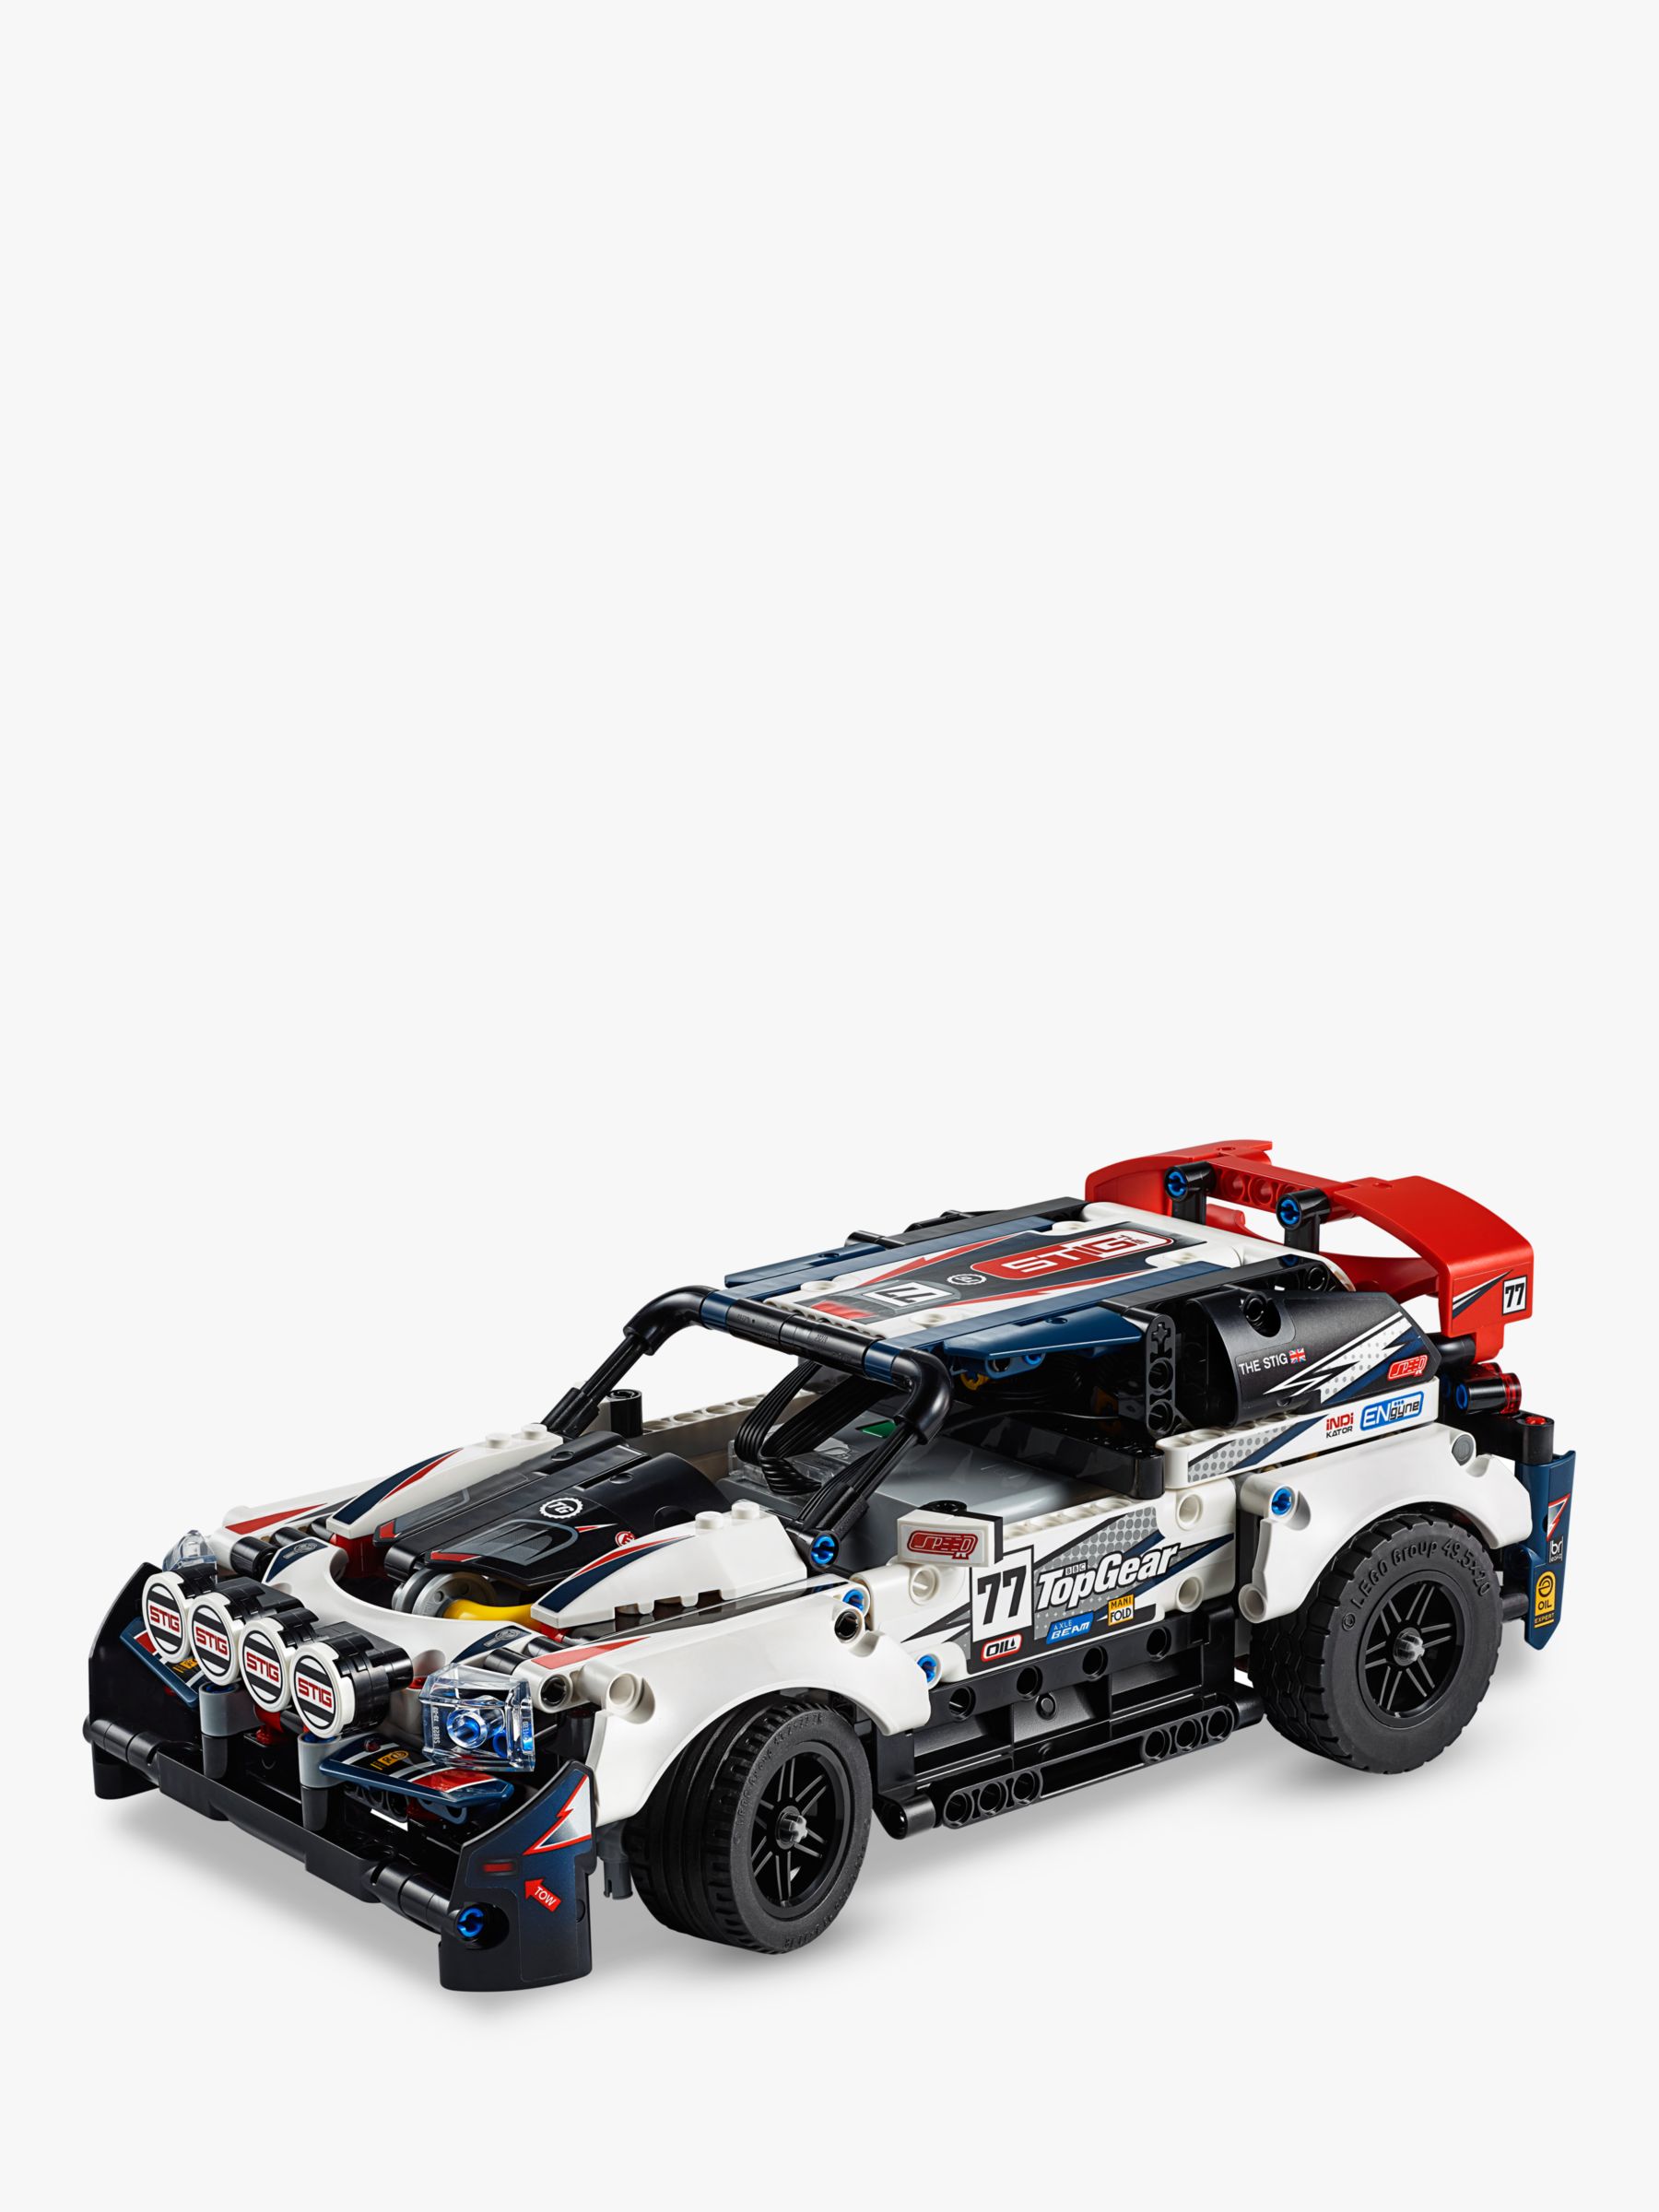 Lego Technic 42109 App Controlled Top Gear Rally Car At John Lewis